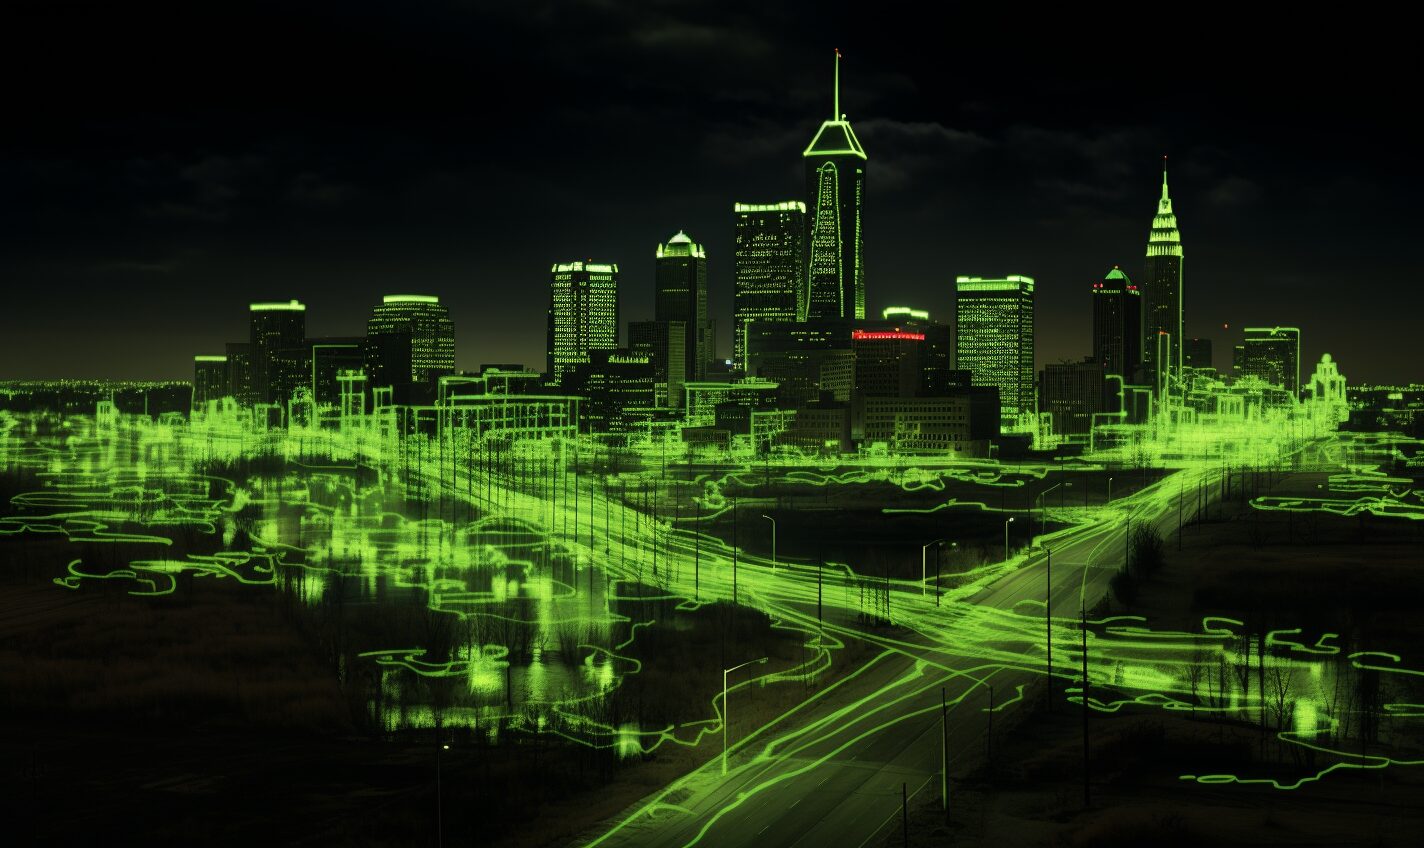 indianapolis, indiana in black and neon green glow